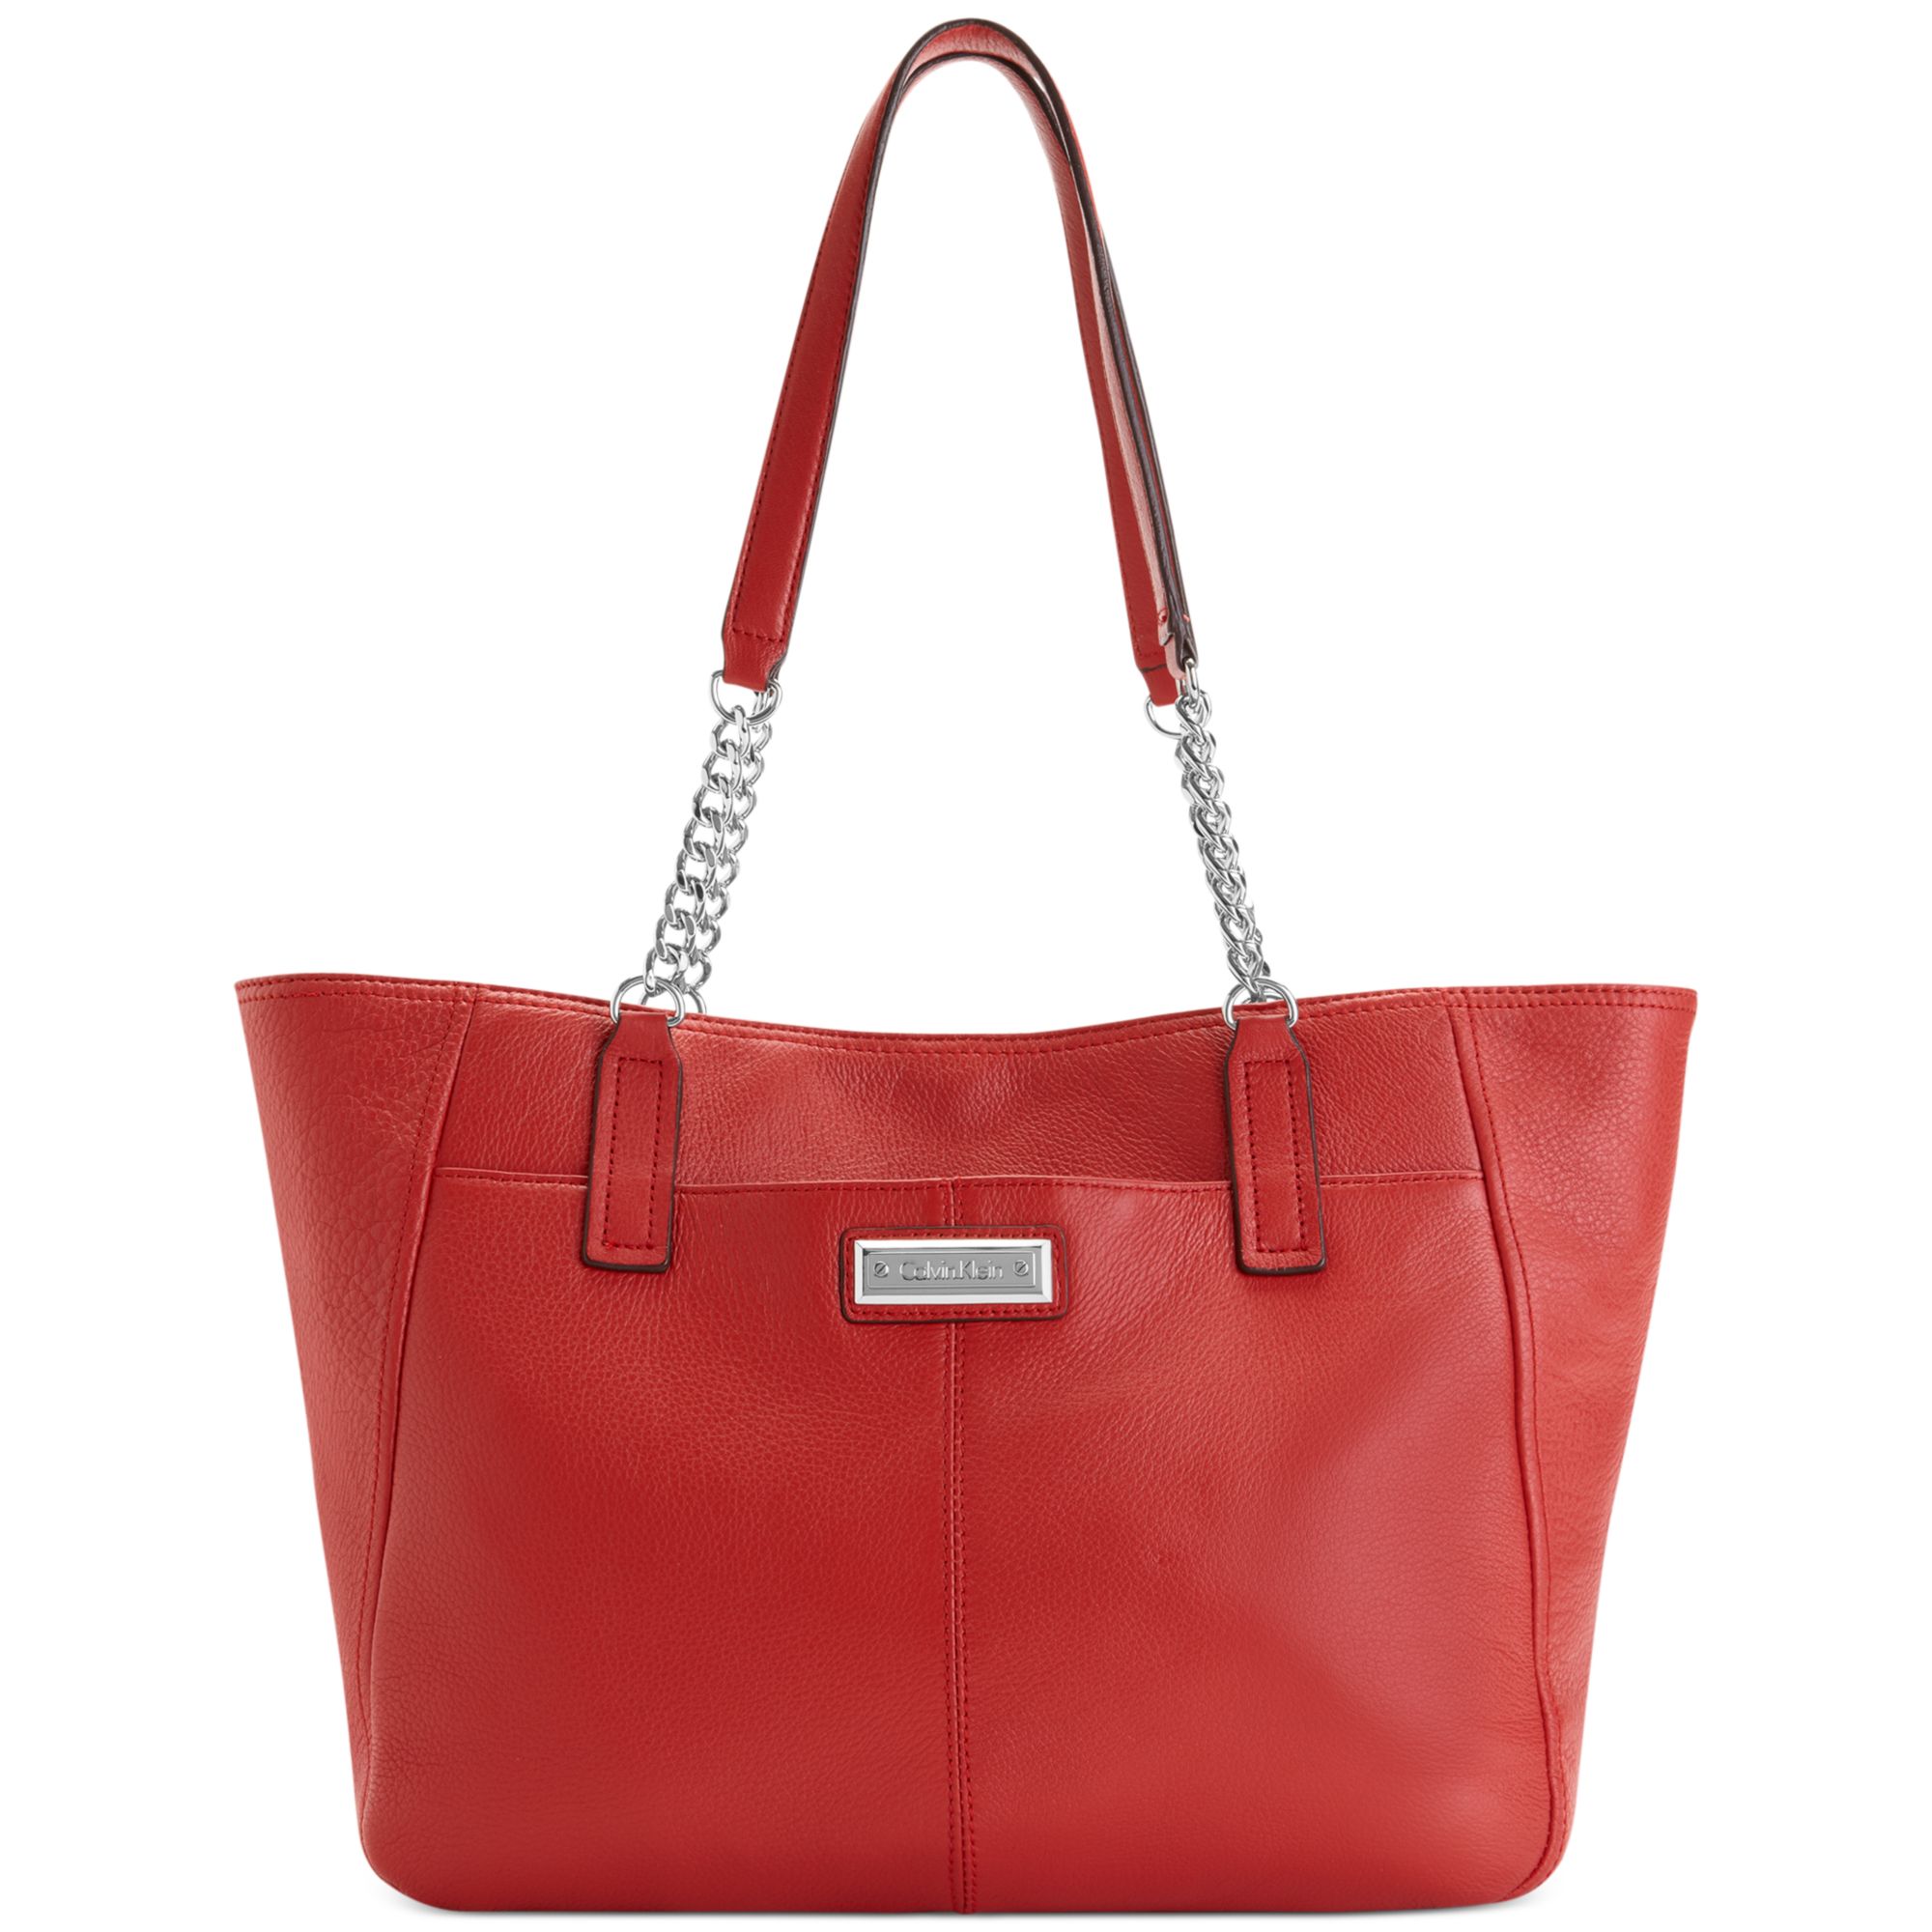 Calvin Klein Macys Key Items Pebble Tote in Red (Fire Red) | Lyst